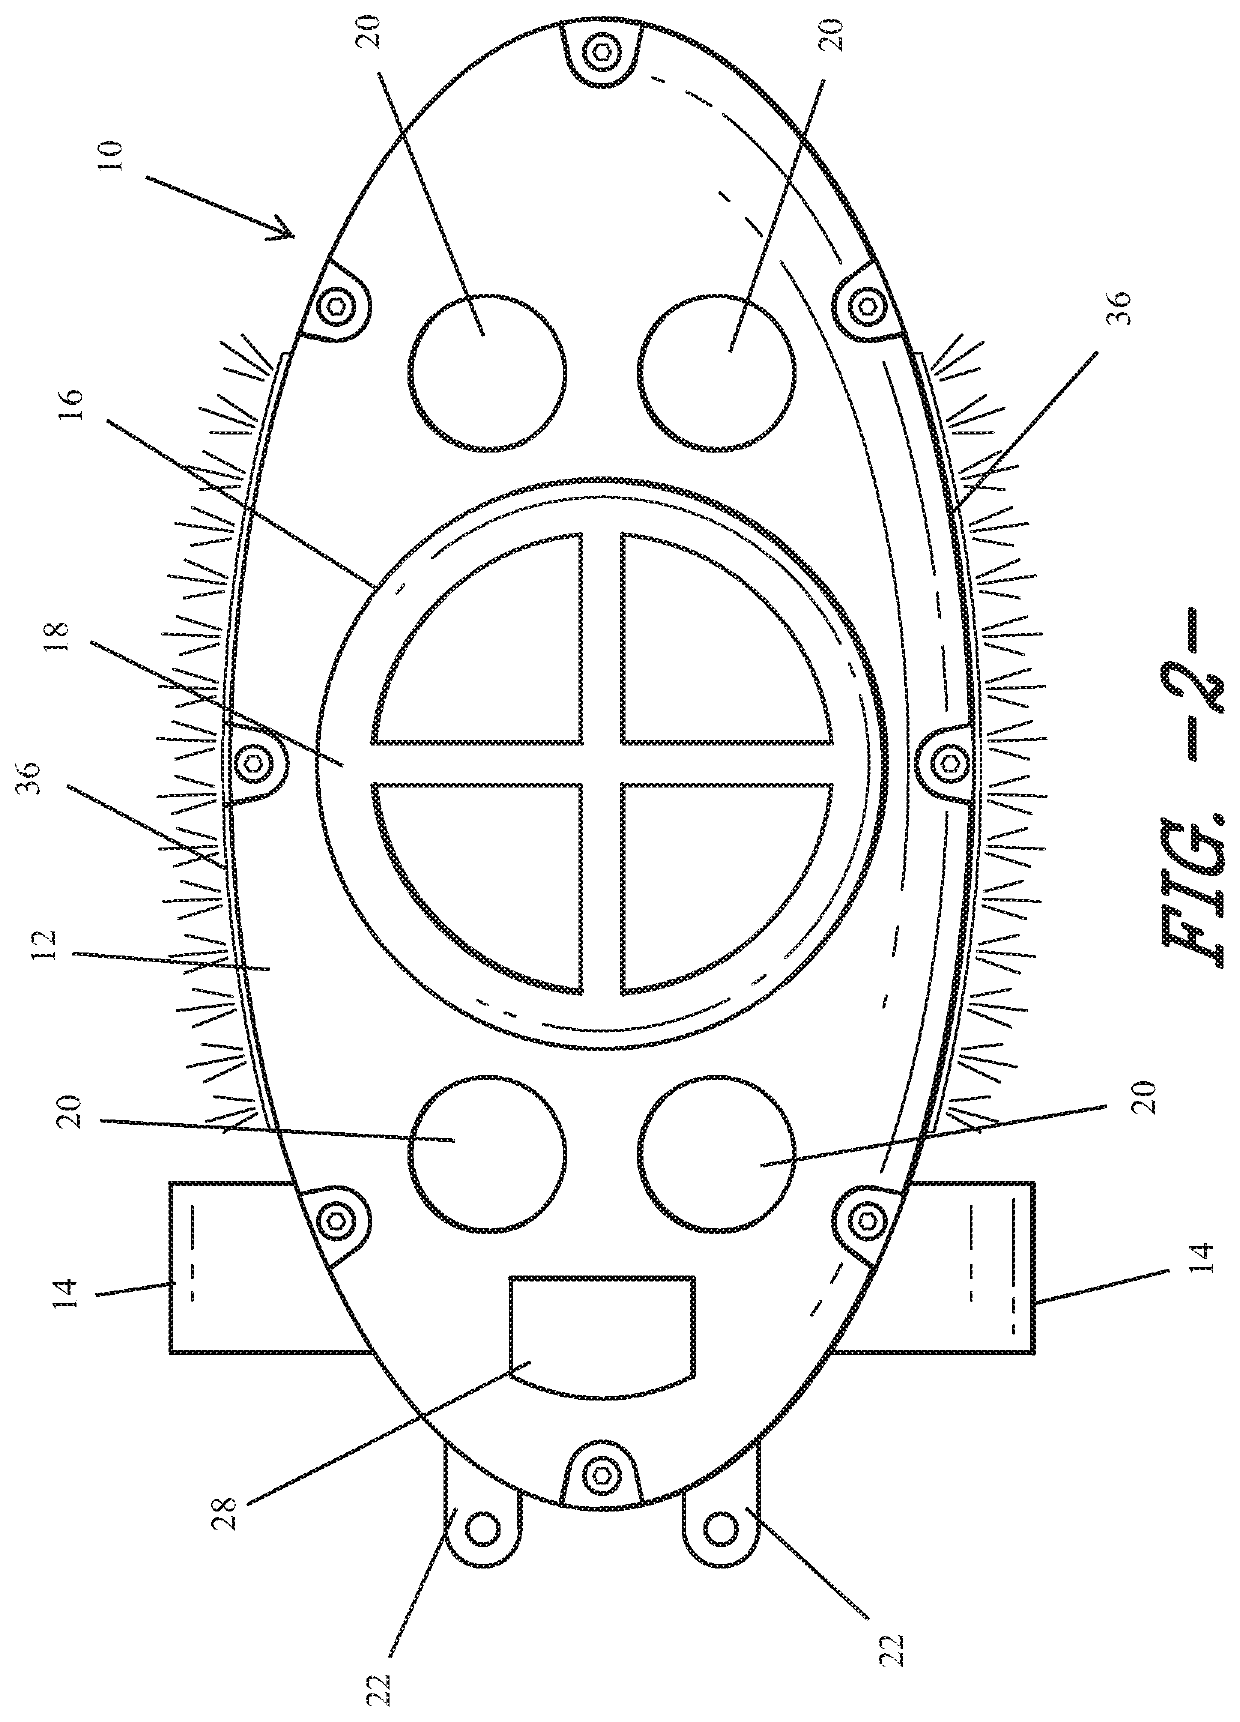 Remotely controlled floating cooler assembly and method